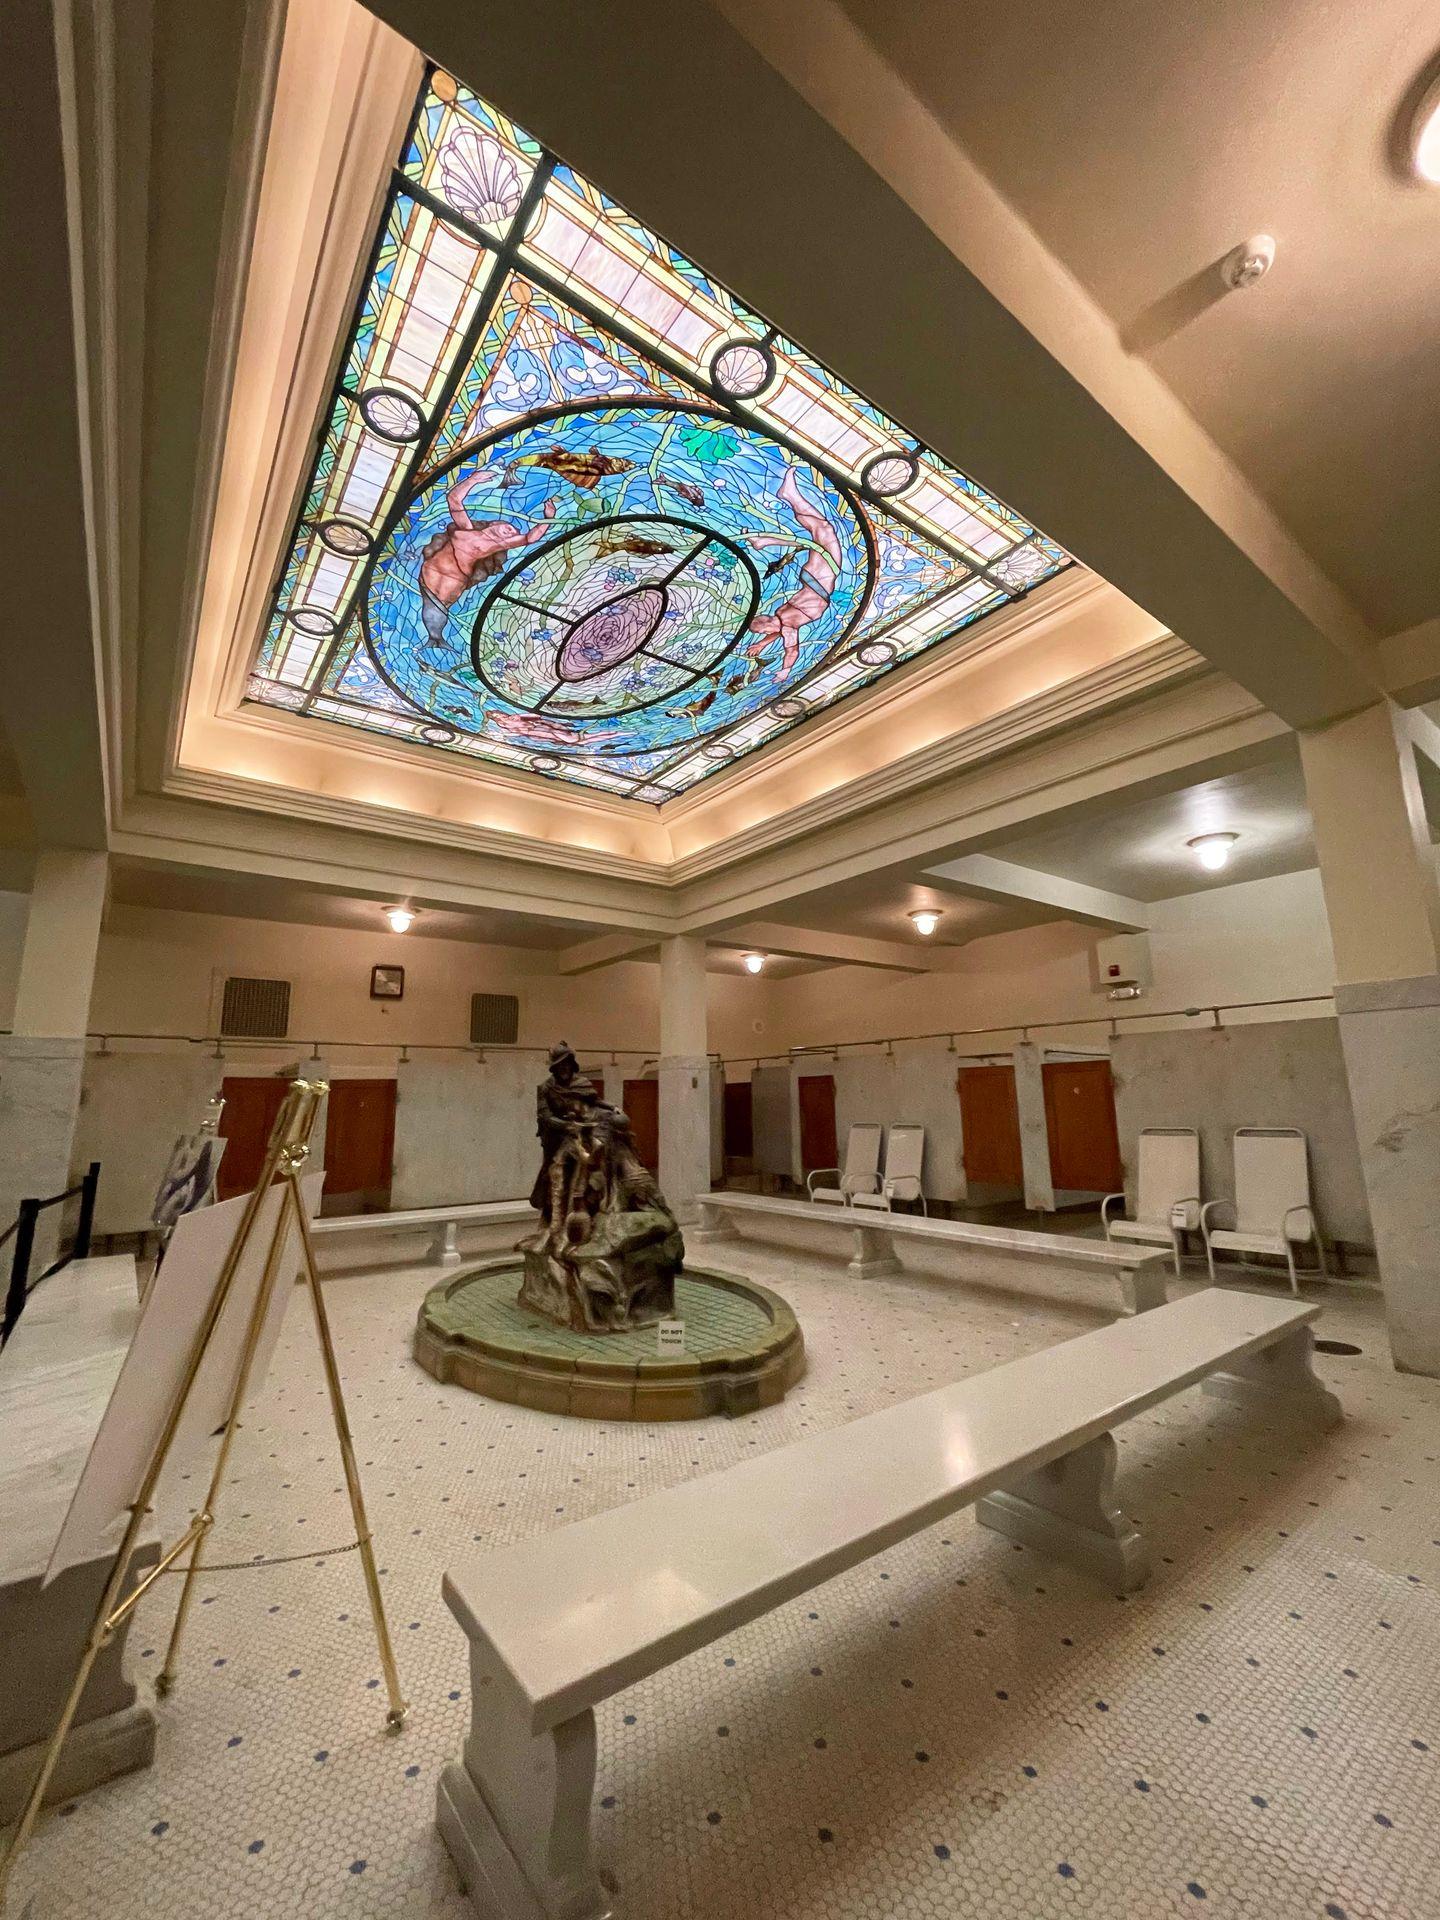 The former locker rooms of the Fordyce Bathhouse. There is an orante stained glass ceiling and a statue in the center of the room.